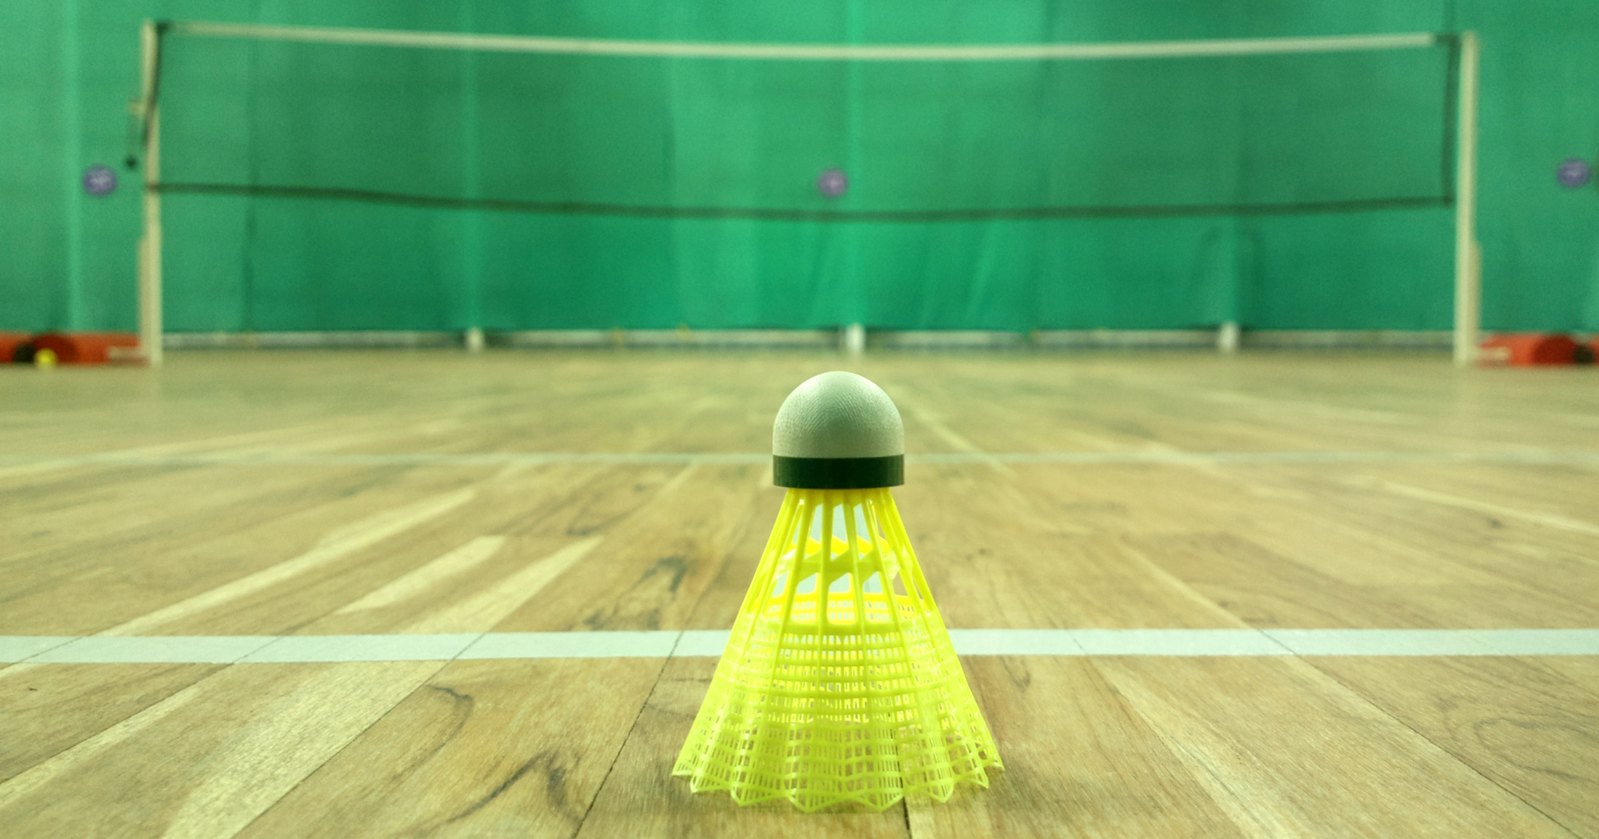 The sport of badminton Represented by the small shuttlecoc… Flickr